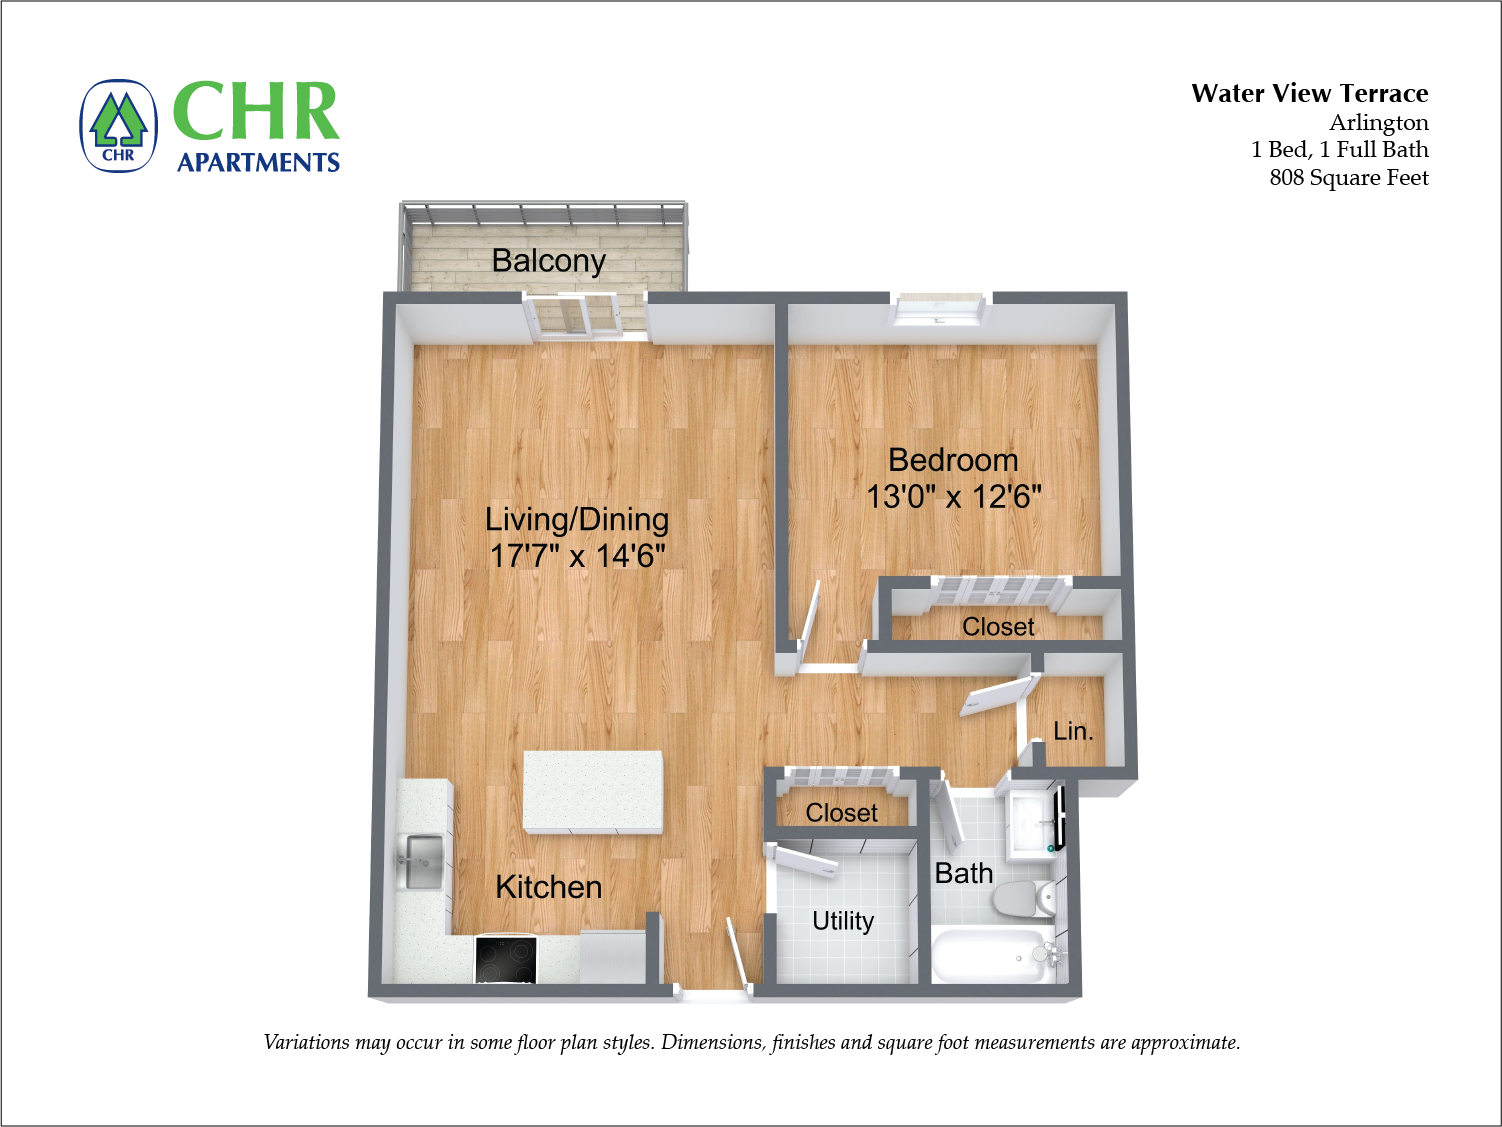 Floor plan 1 Bed/1 Bath with Balcony and Extra Closets image 1